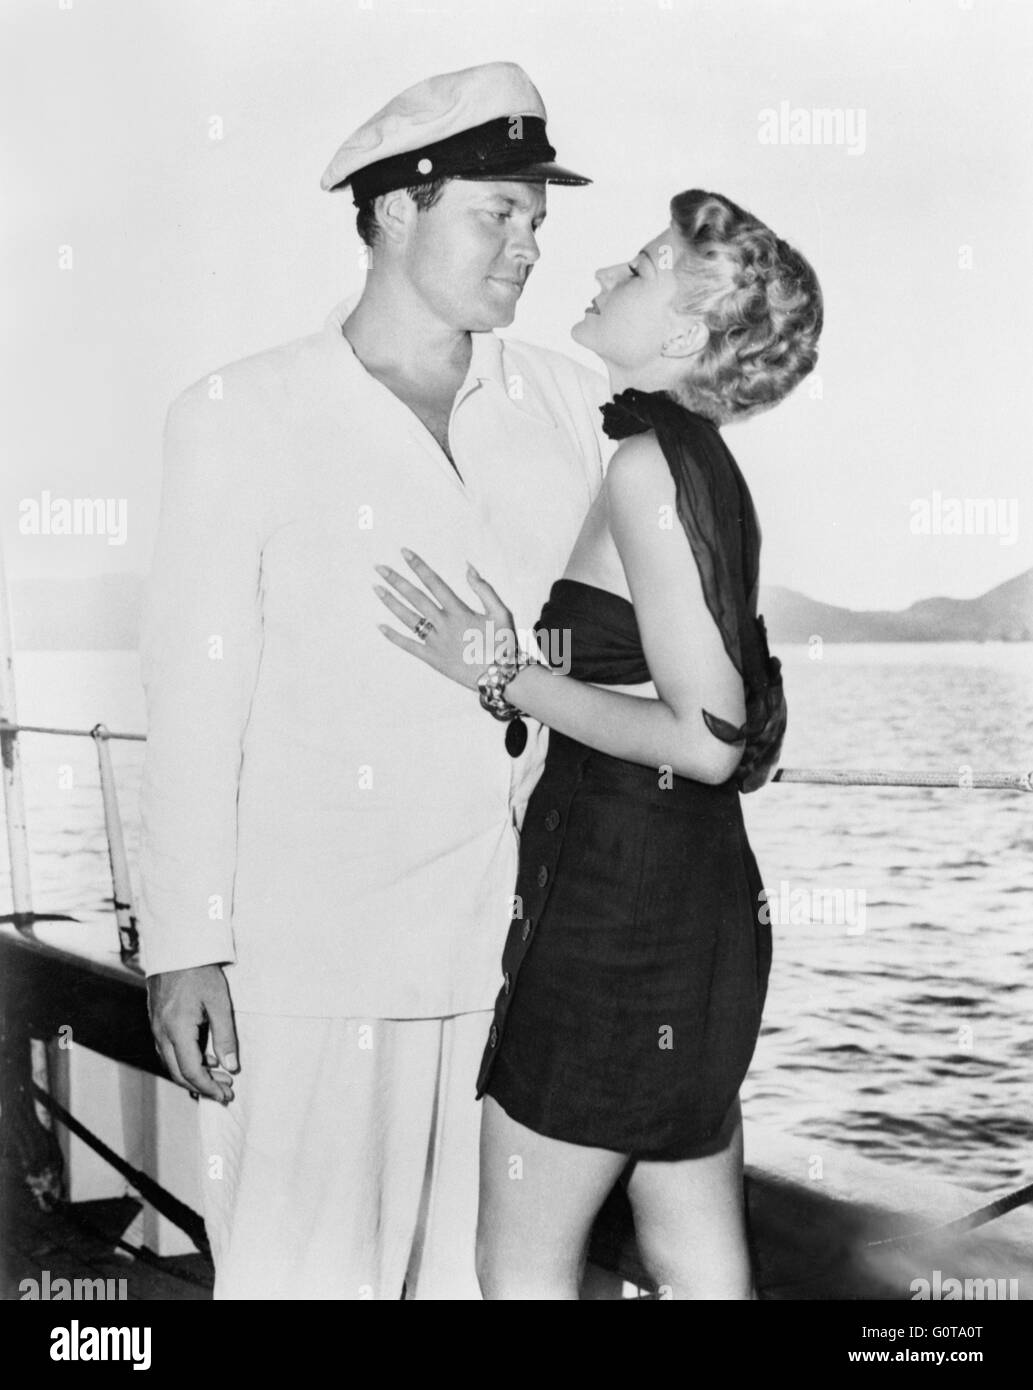 Orson Welles and Rita Hayworth / The Lady From Shanghai / 1948 directed by Orson Welles (Columbia Pictures) Stock Photo